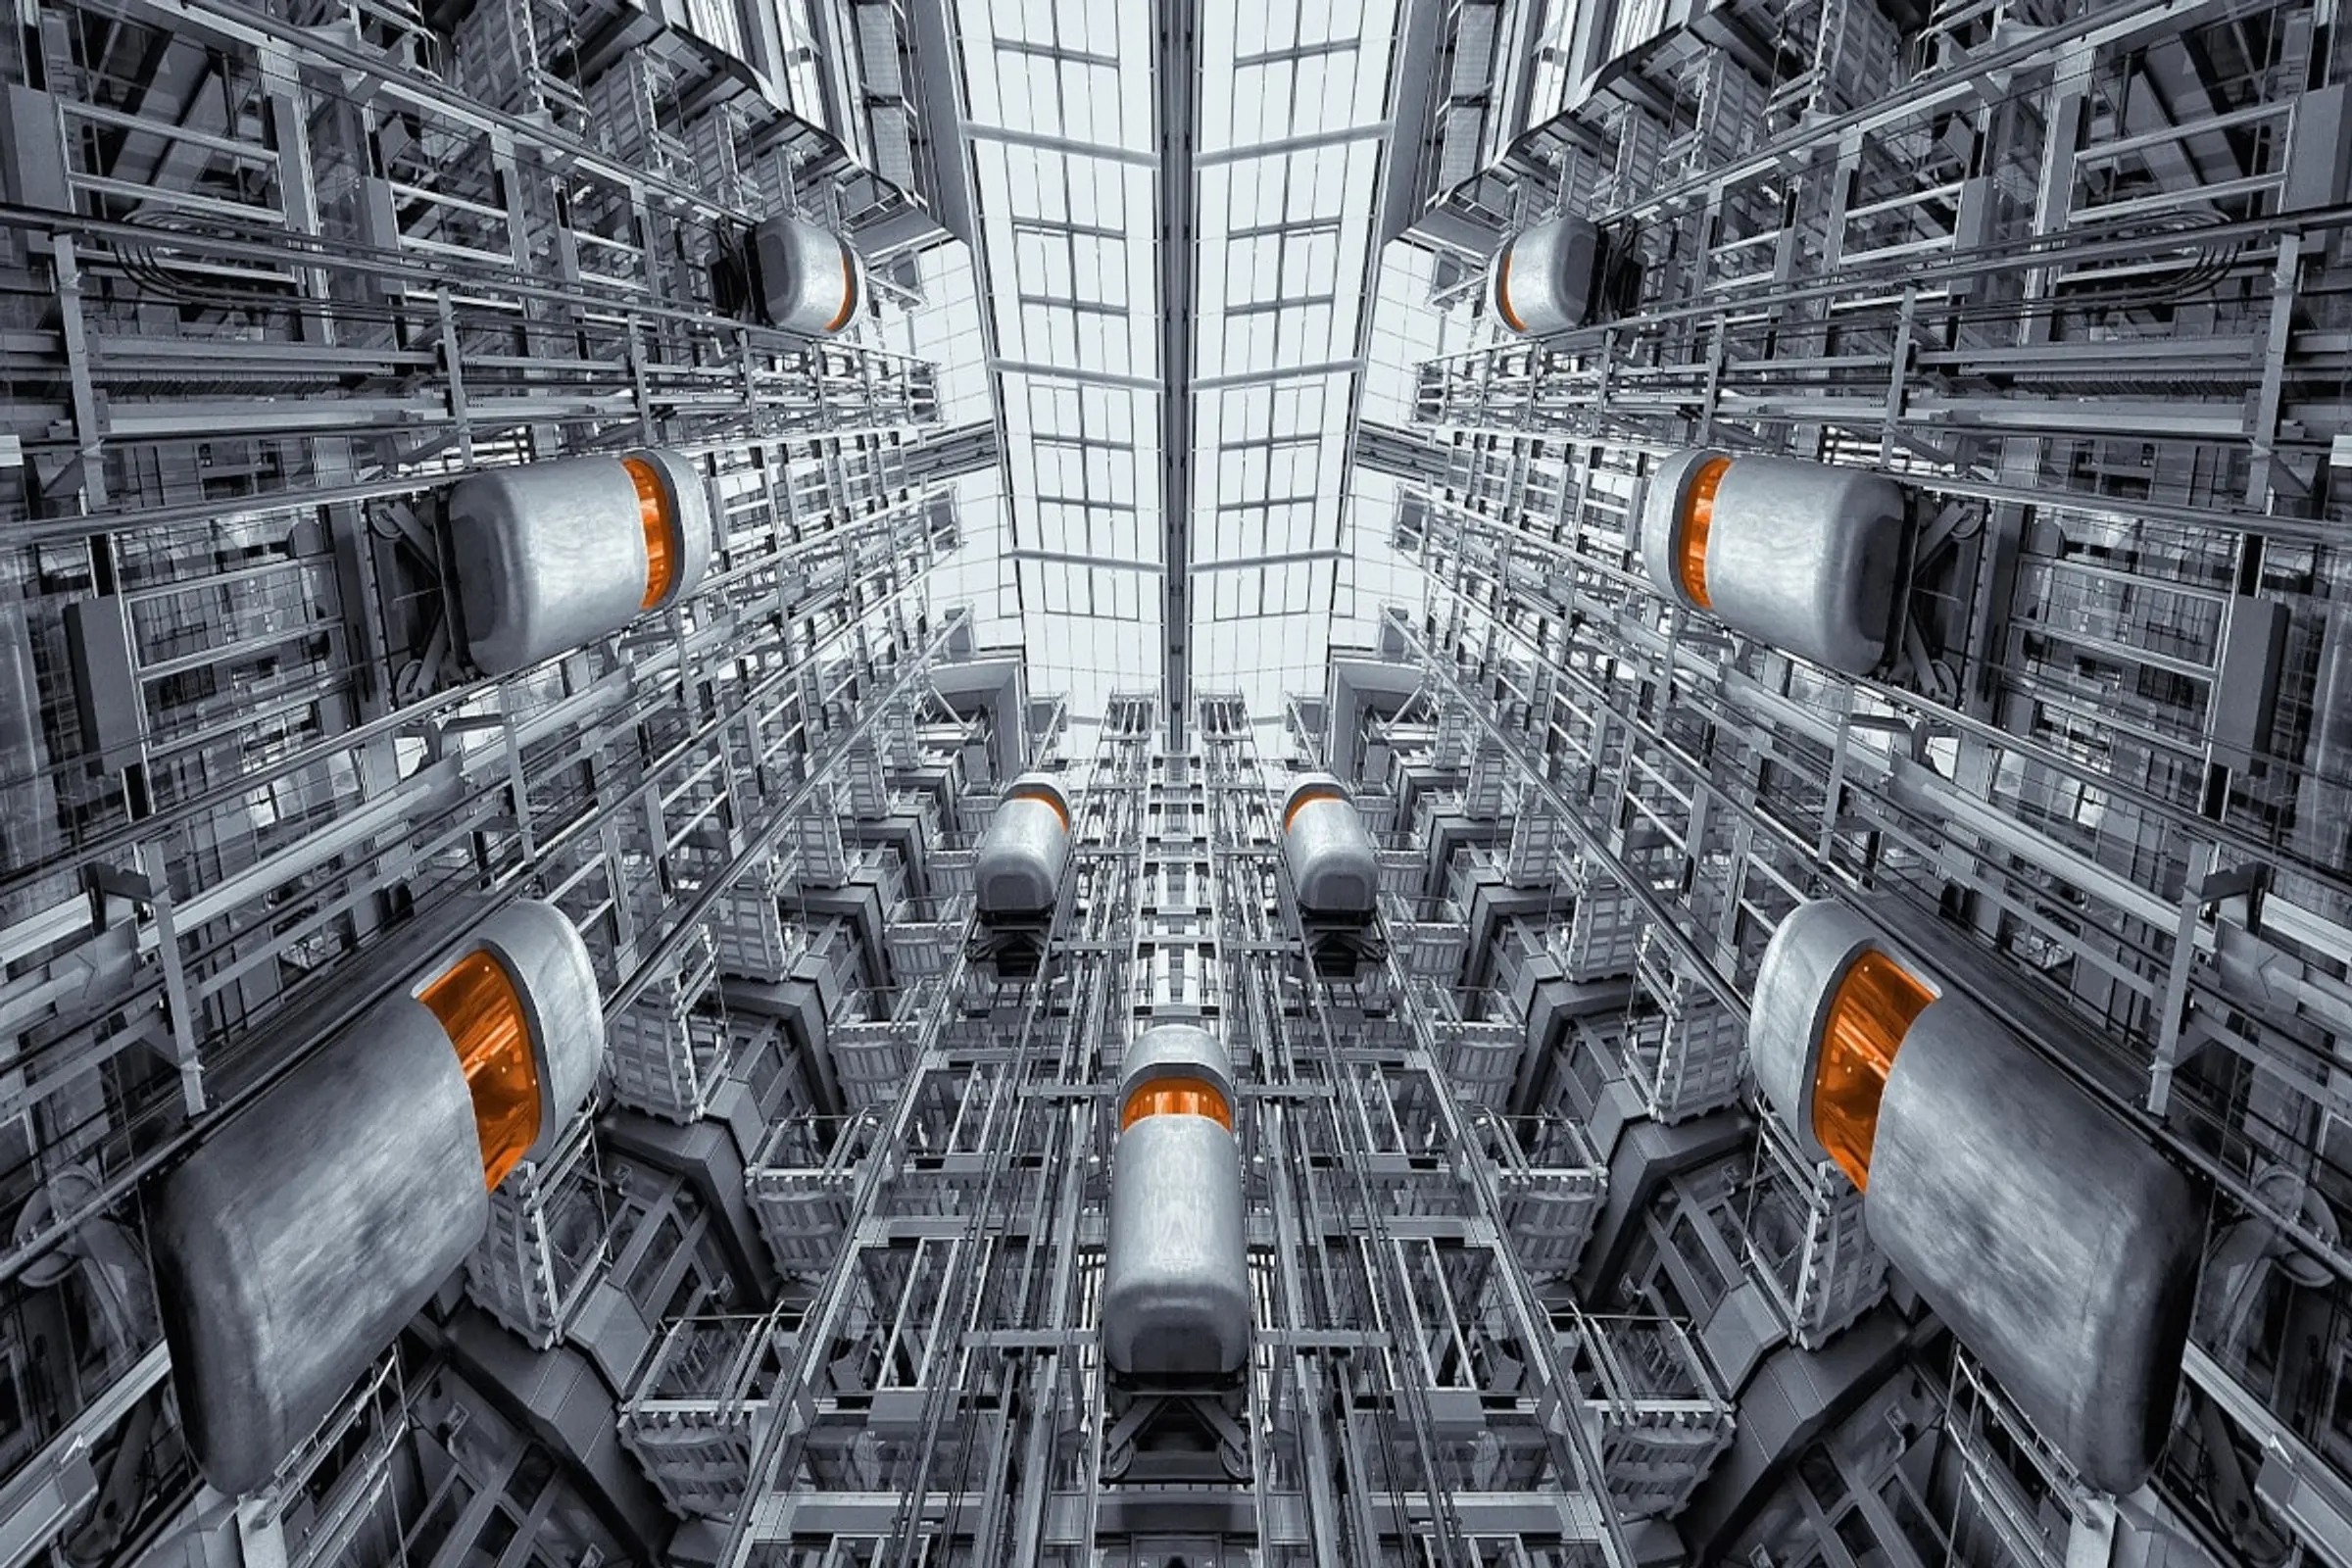 Elevators at the Ludwig Erhard Haus in Berlin. Photo by Markus Christ via Pixabay.